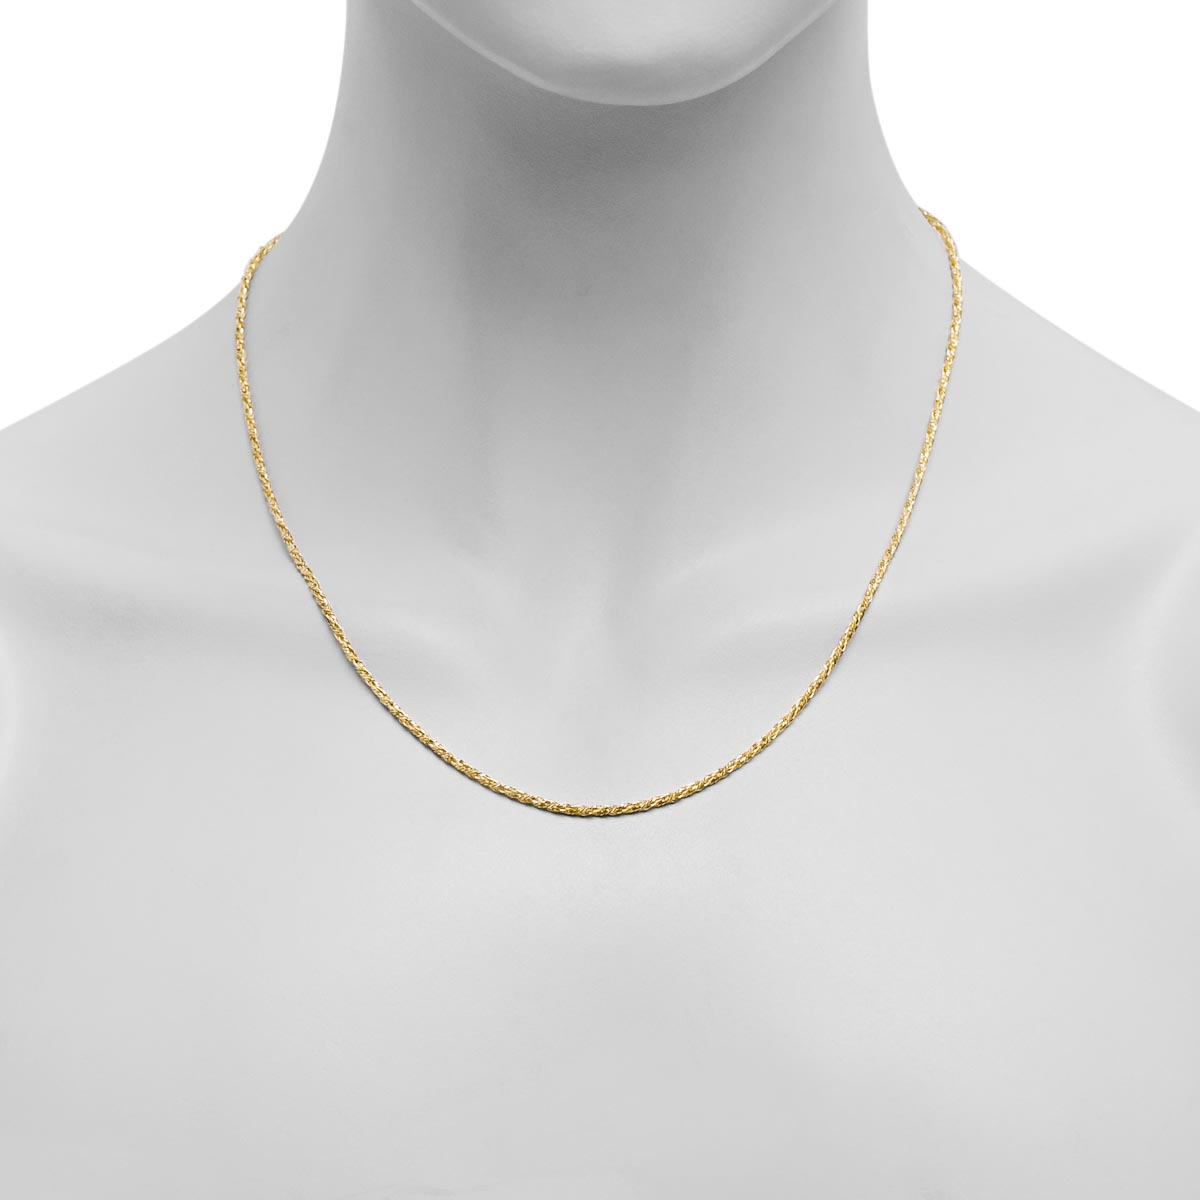 Estate Braided Wheat Chain in 18kt Yellow Gold (20 inches and 1.9mm wide)